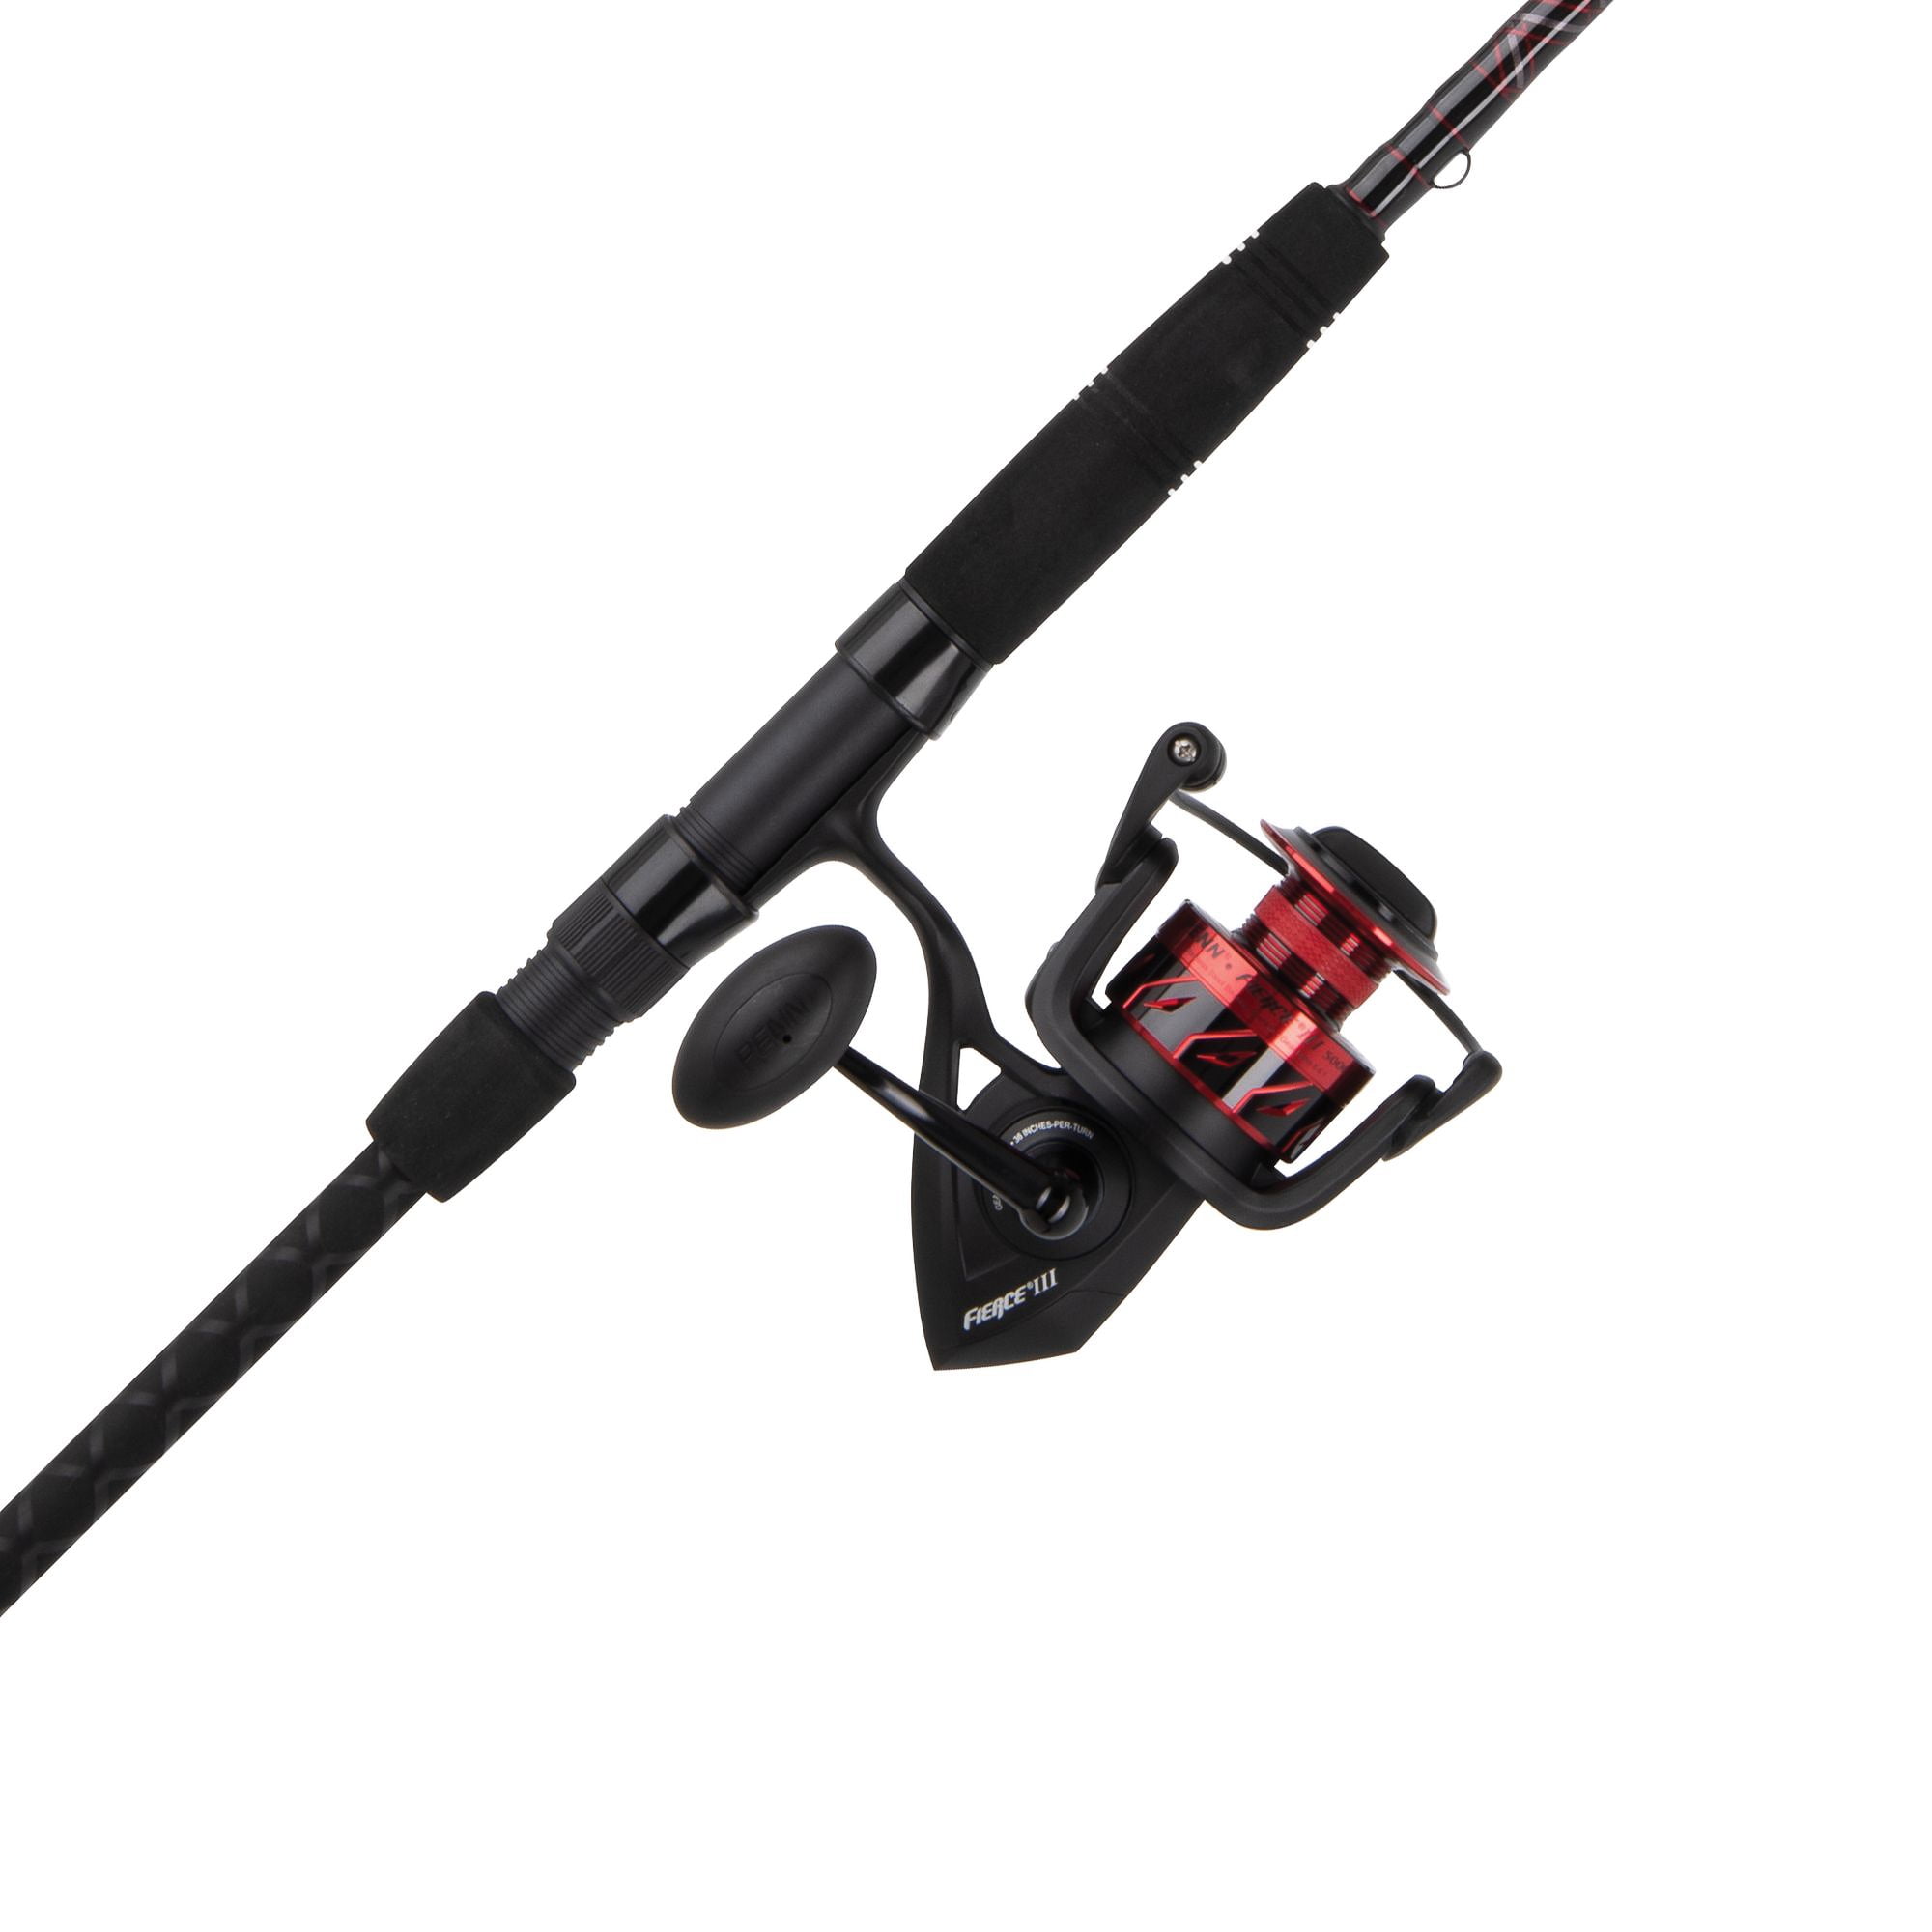 Penn Battle Spinning Reels - Guides Review 